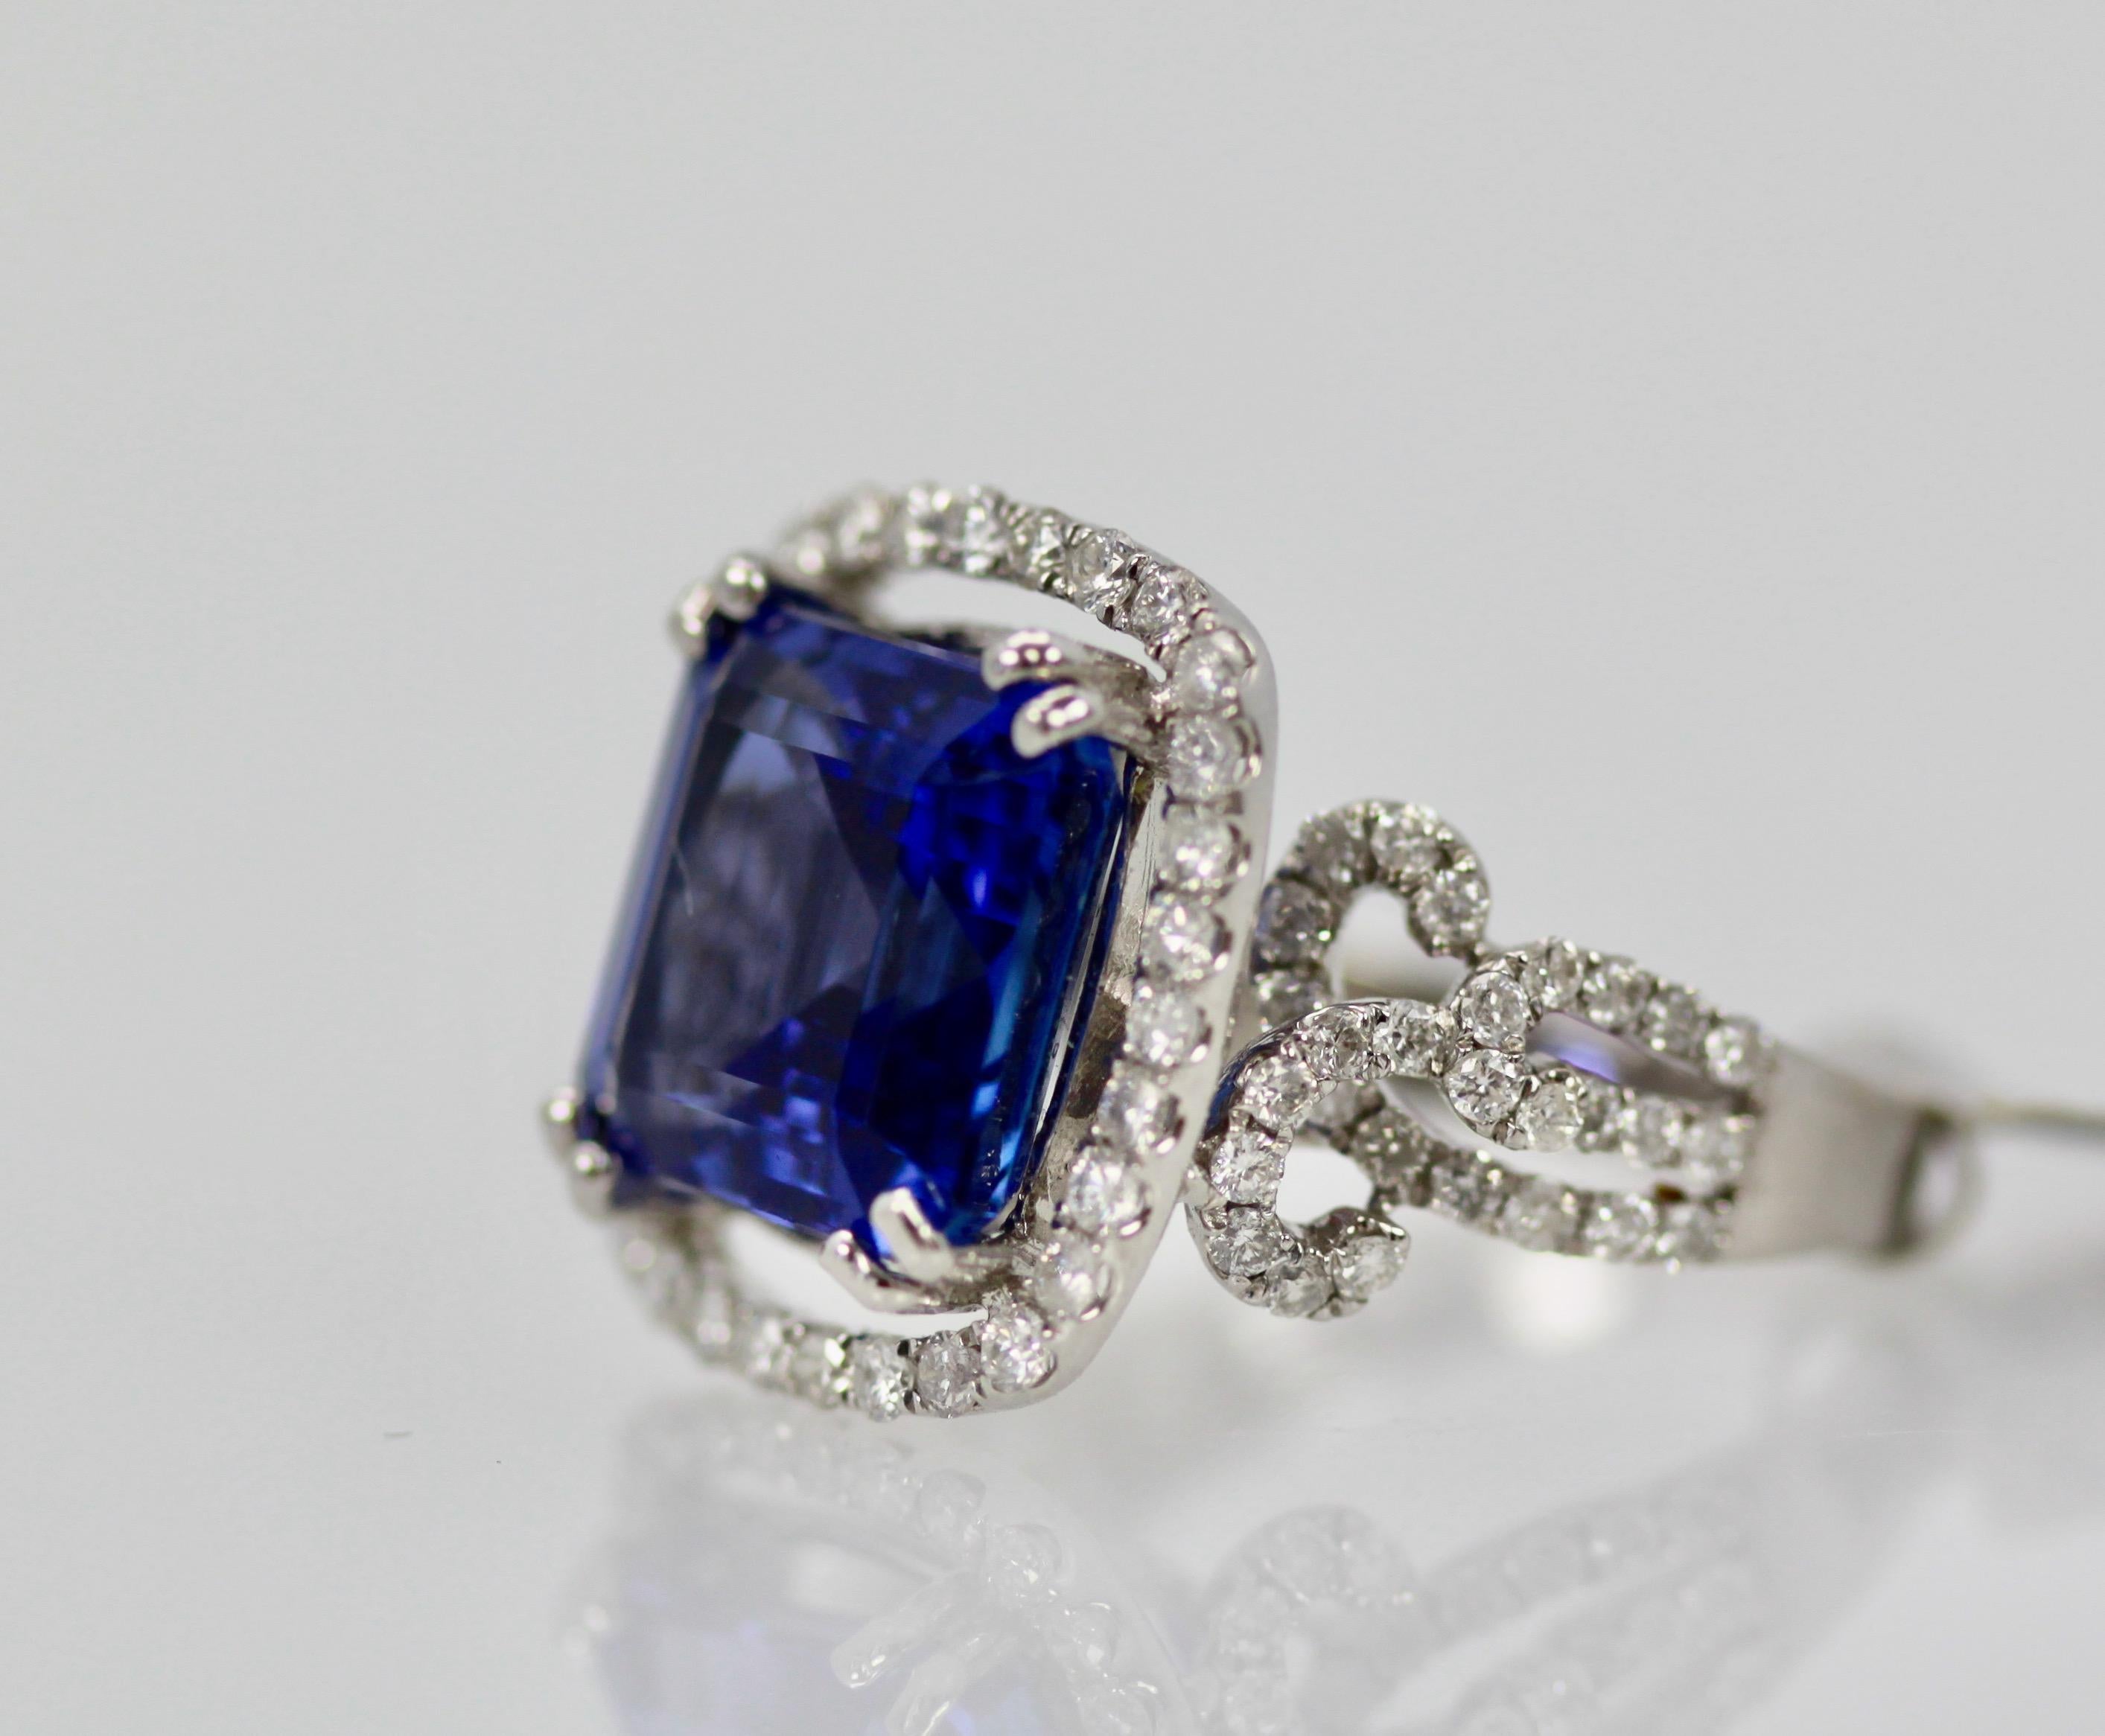 This Tanzanite and Diamond ring boosts an exceptional Tanzanite of 8.59 carats.  A beautiful blue exceptionally clean and measures 12.73 x 11.56.  It is in a Diamond surround measuring 15.94 x 17.35.  The Diamonds are white G, VS1 and there are 1.35